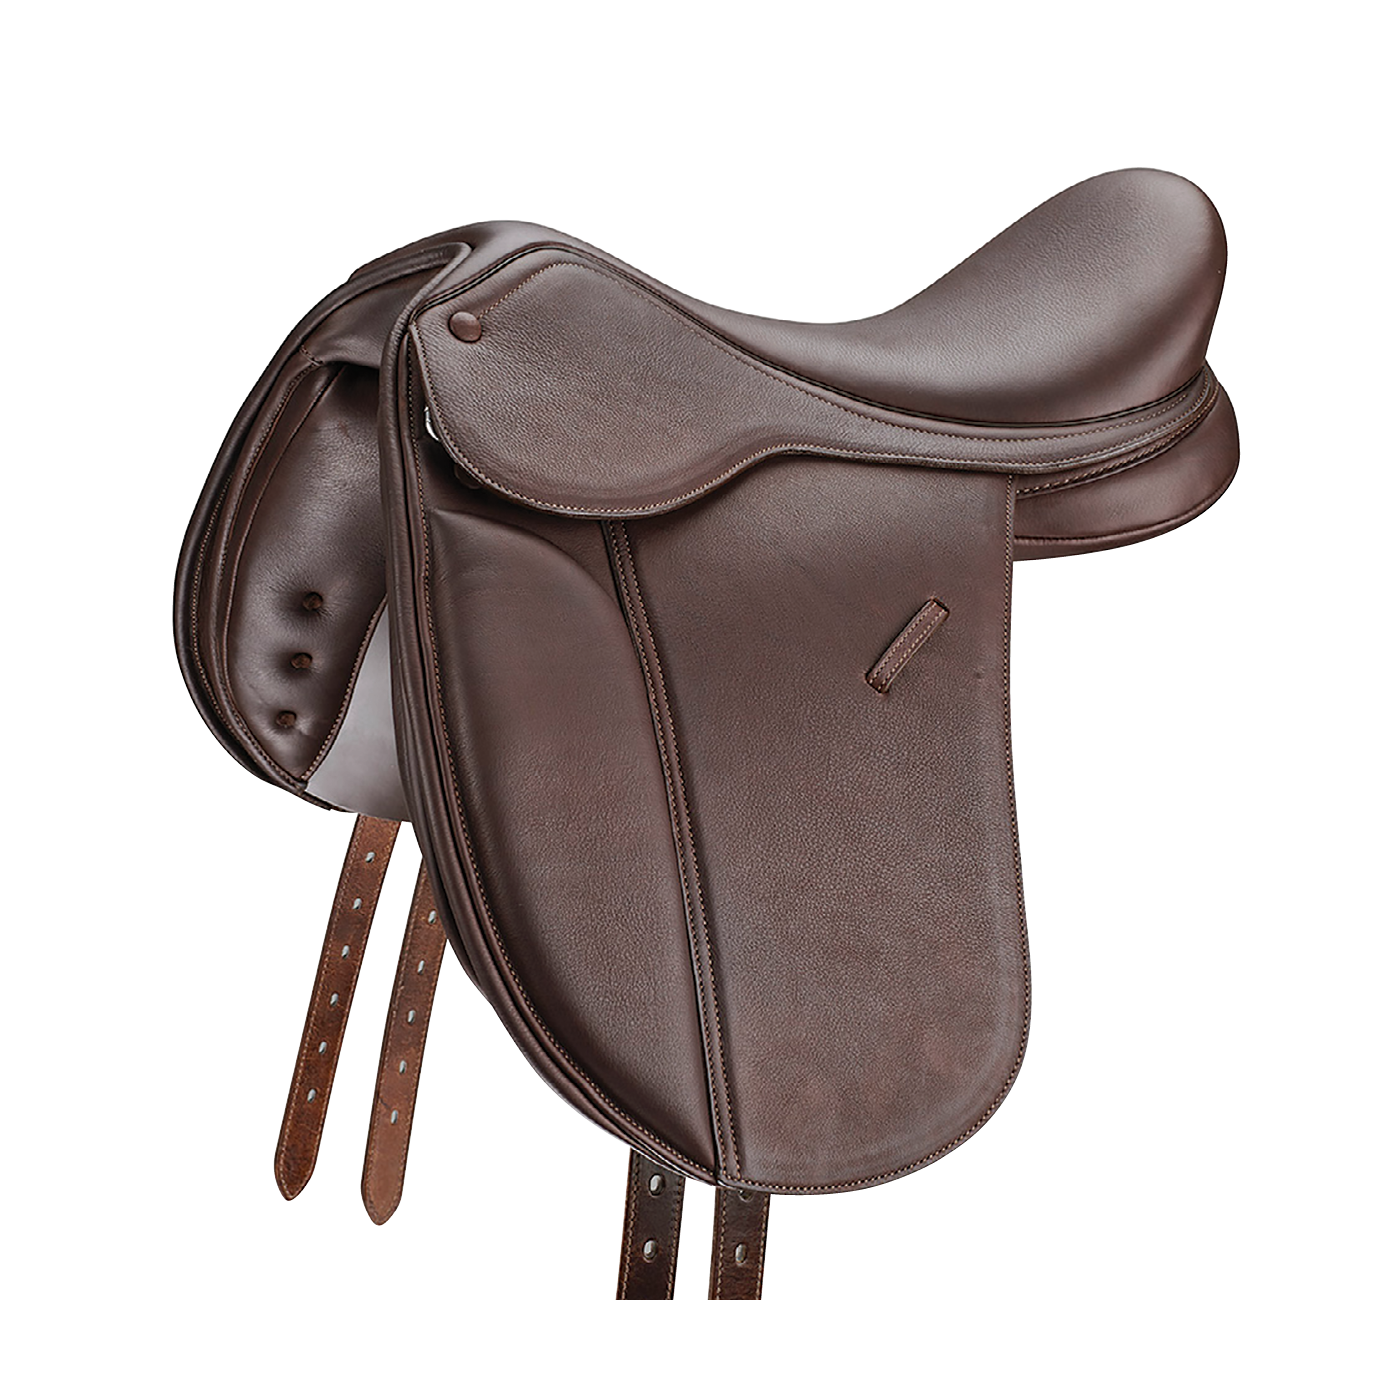 Bates Pony Show in Classic Brown Luxe Leather (DISPLAY MODEL)